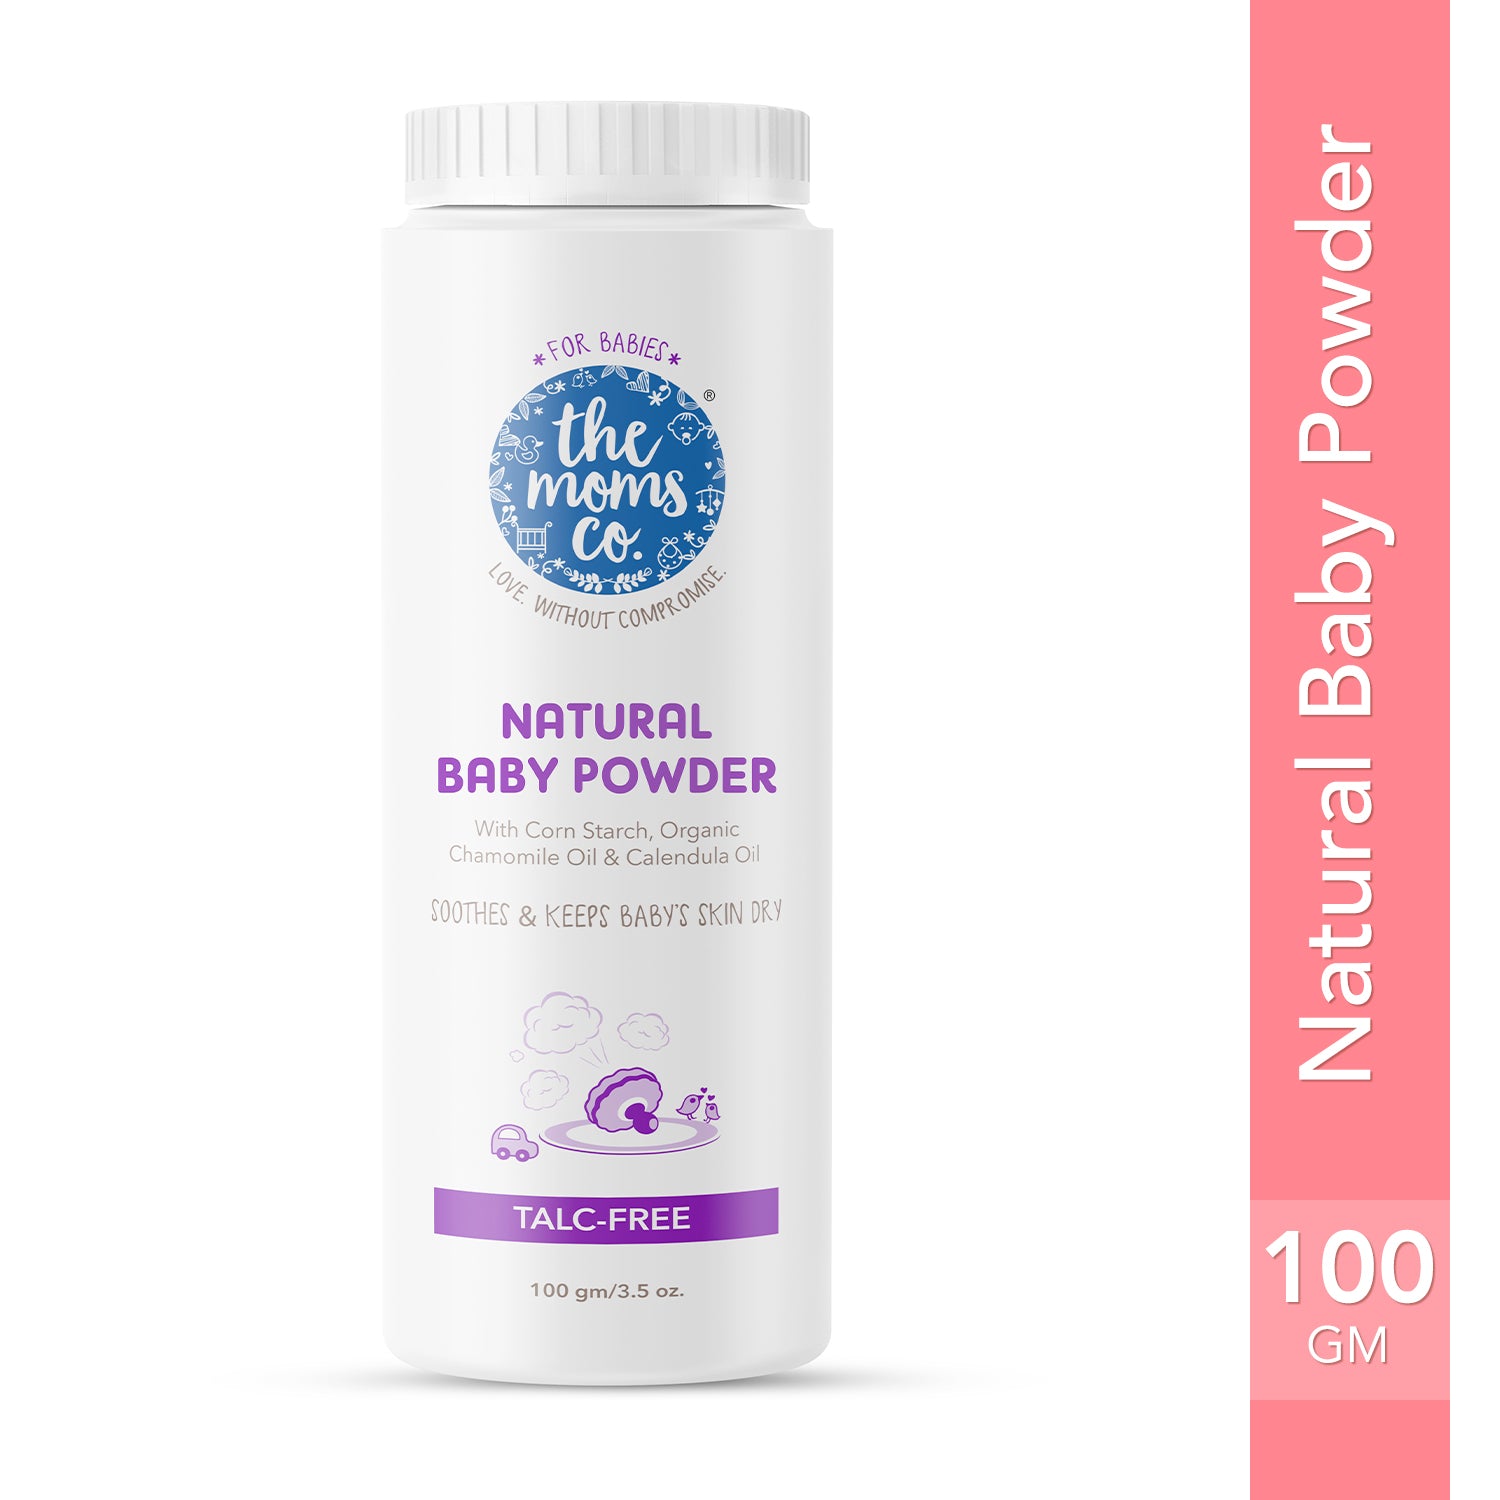 The Moms Co. Talc-Free Natural Baby Powder with Corn Starch | 100% Natural | Australia-Certified Toxin-Free | with Chamomile Oil, Calendula Oil and Organic Jojoba Oil